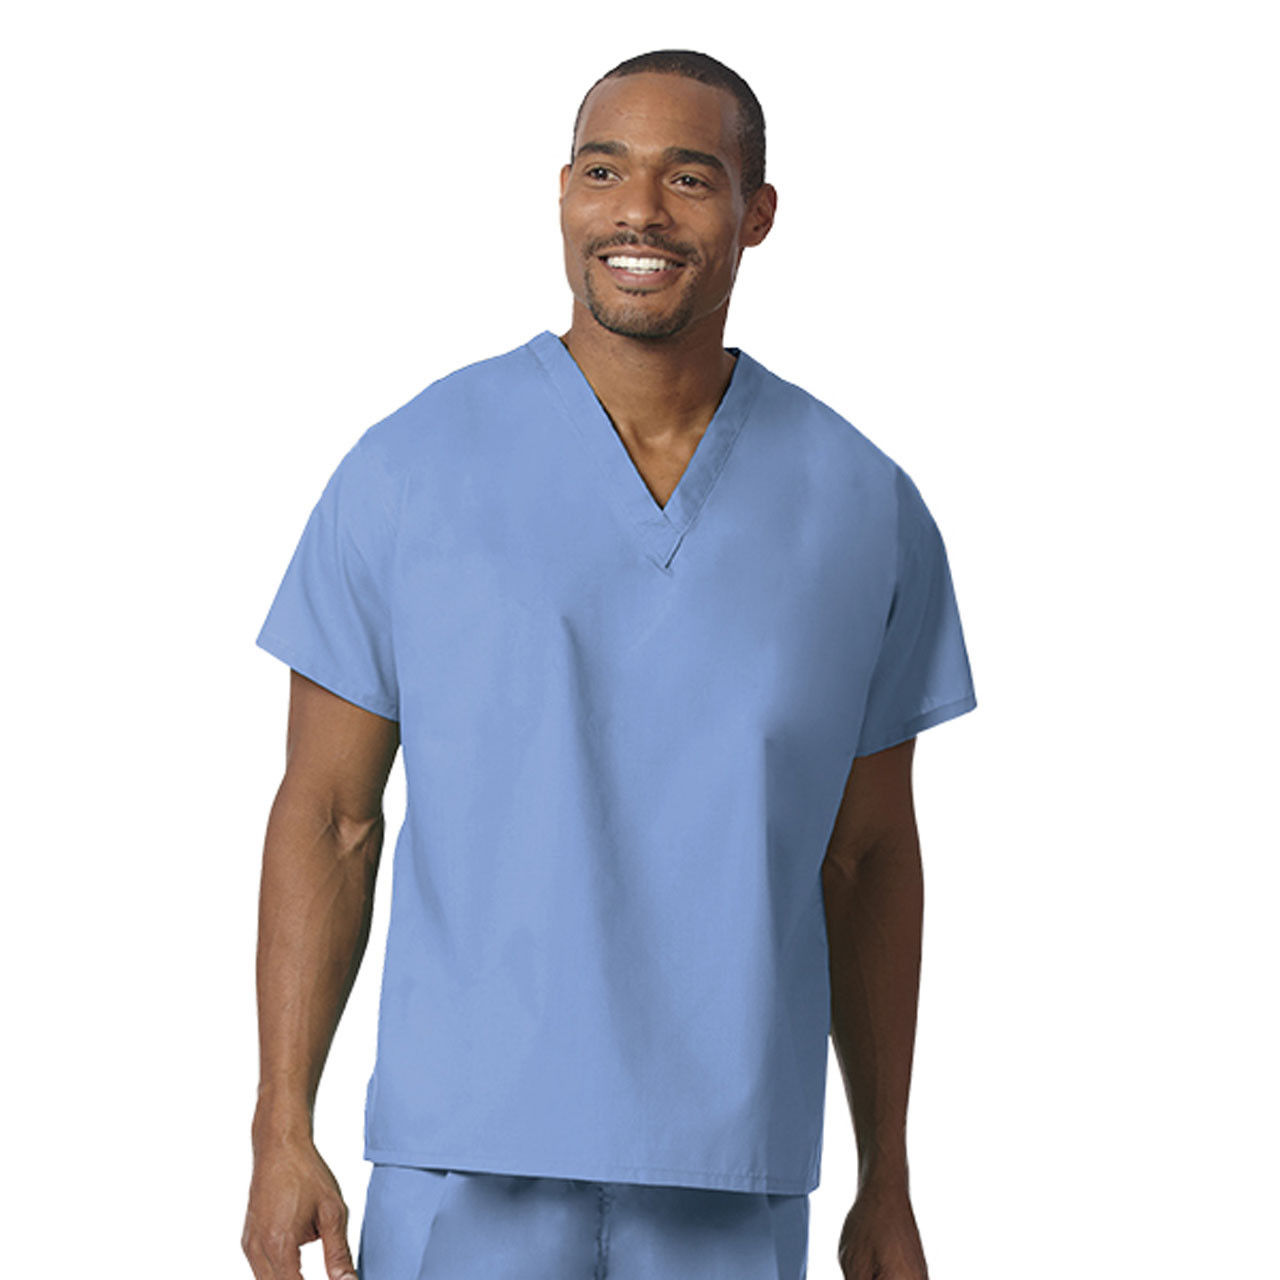 What characteristics does the blue surgical scrubs top from the Unisex Reversible Scrub Set have?